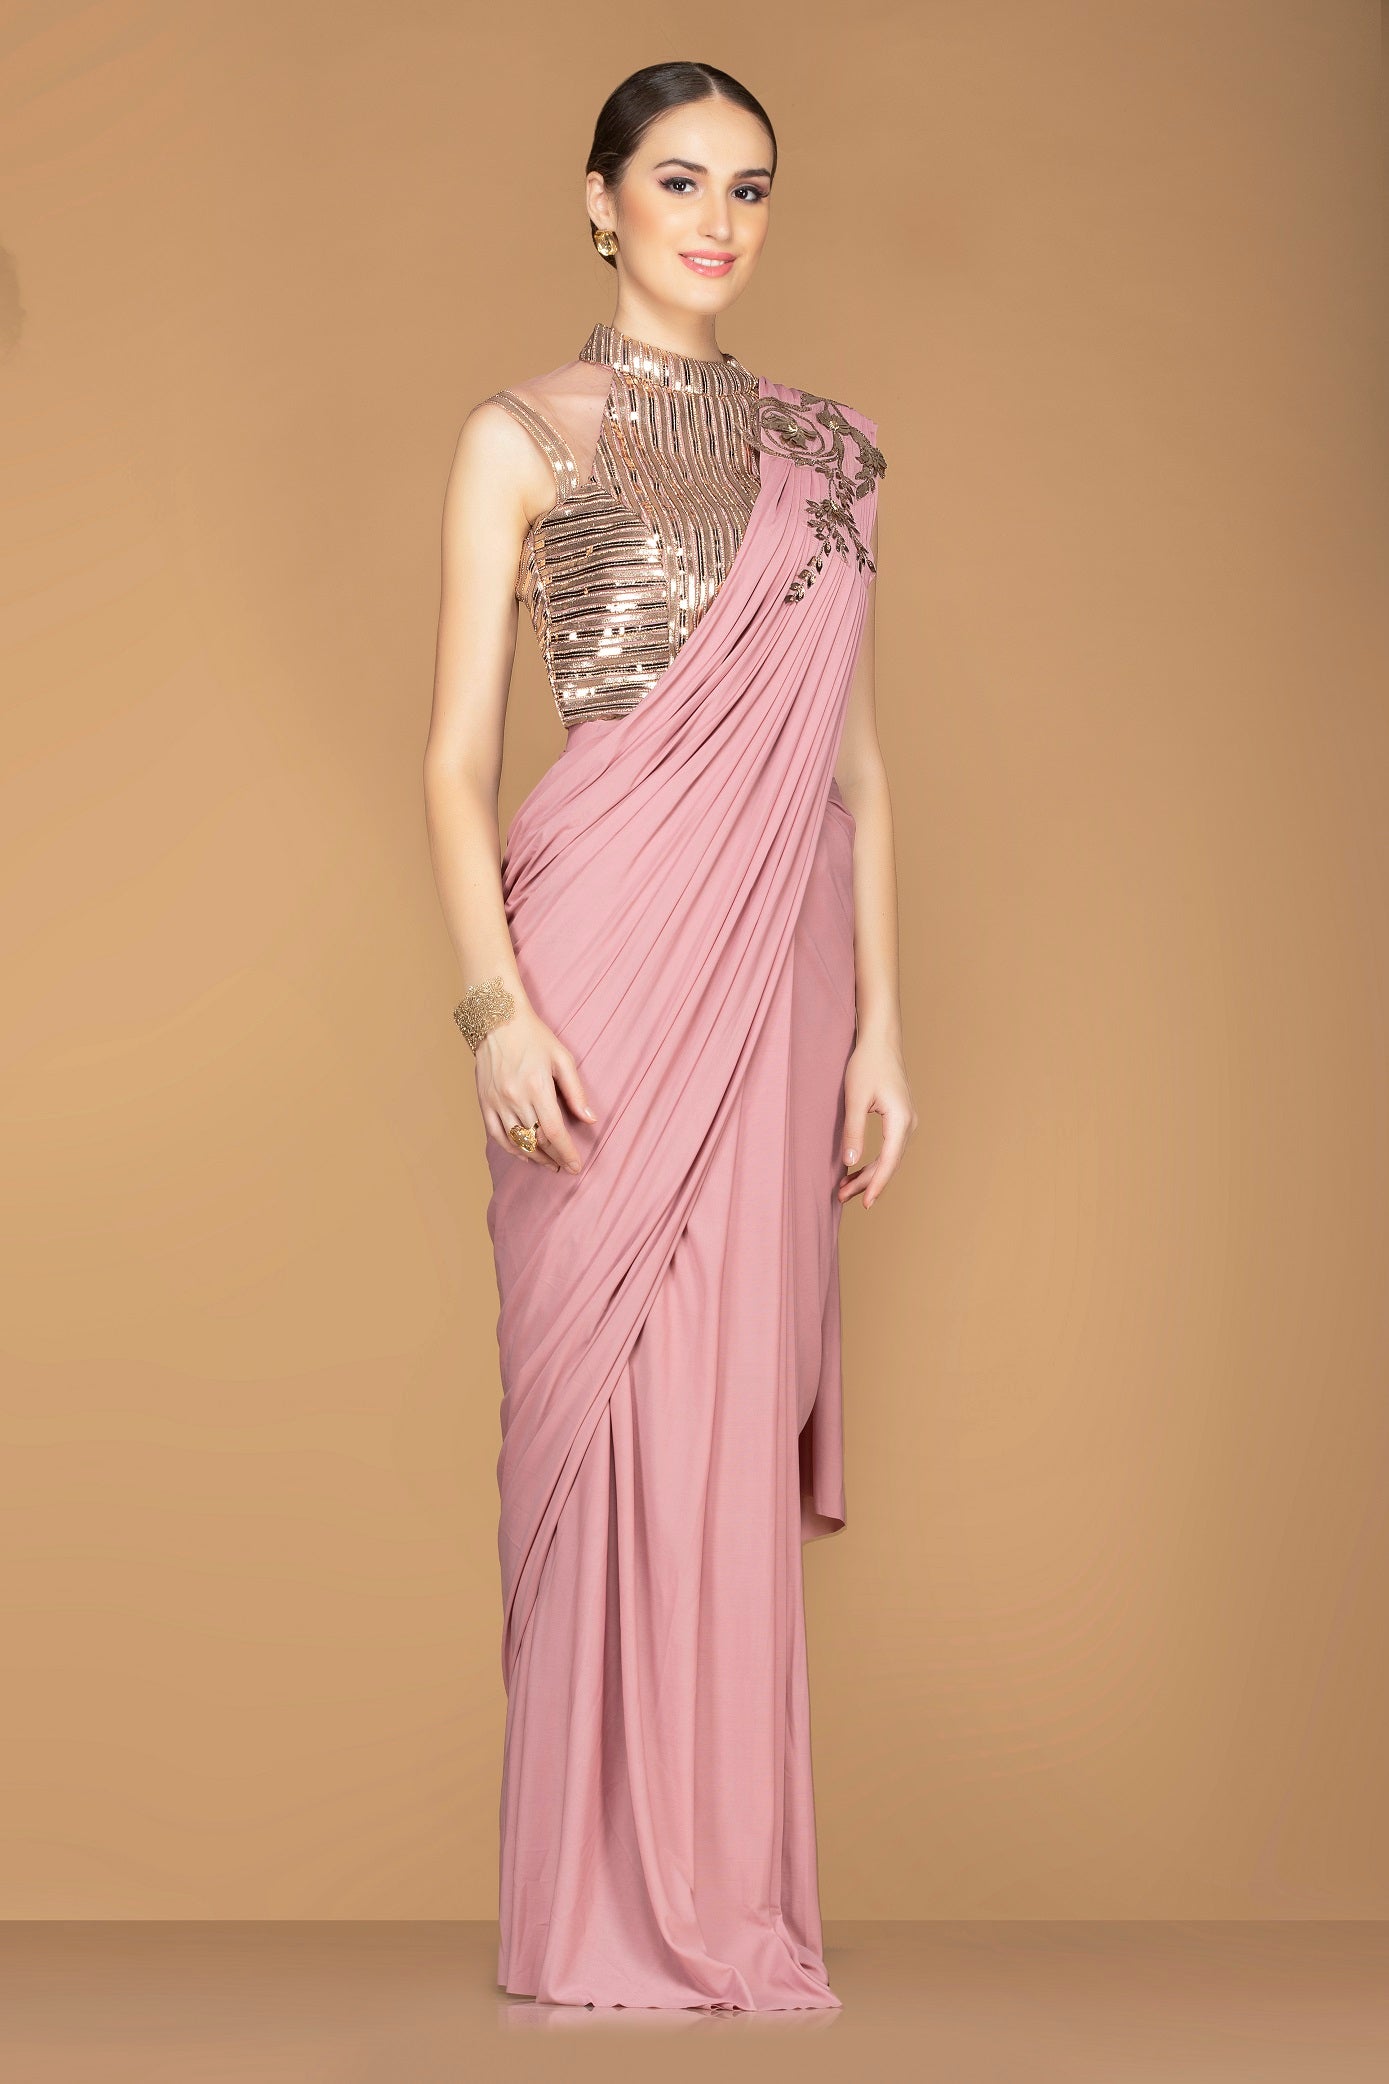 Buy beautiful rose pink draped pallu sari online in USA with designer sari blouse. Champion ethnic fashion with a splendid collection of designer sarees, embroidered sarees with blouse, weddings sarees from Pure Elegance Indian fashion store in USA.-side